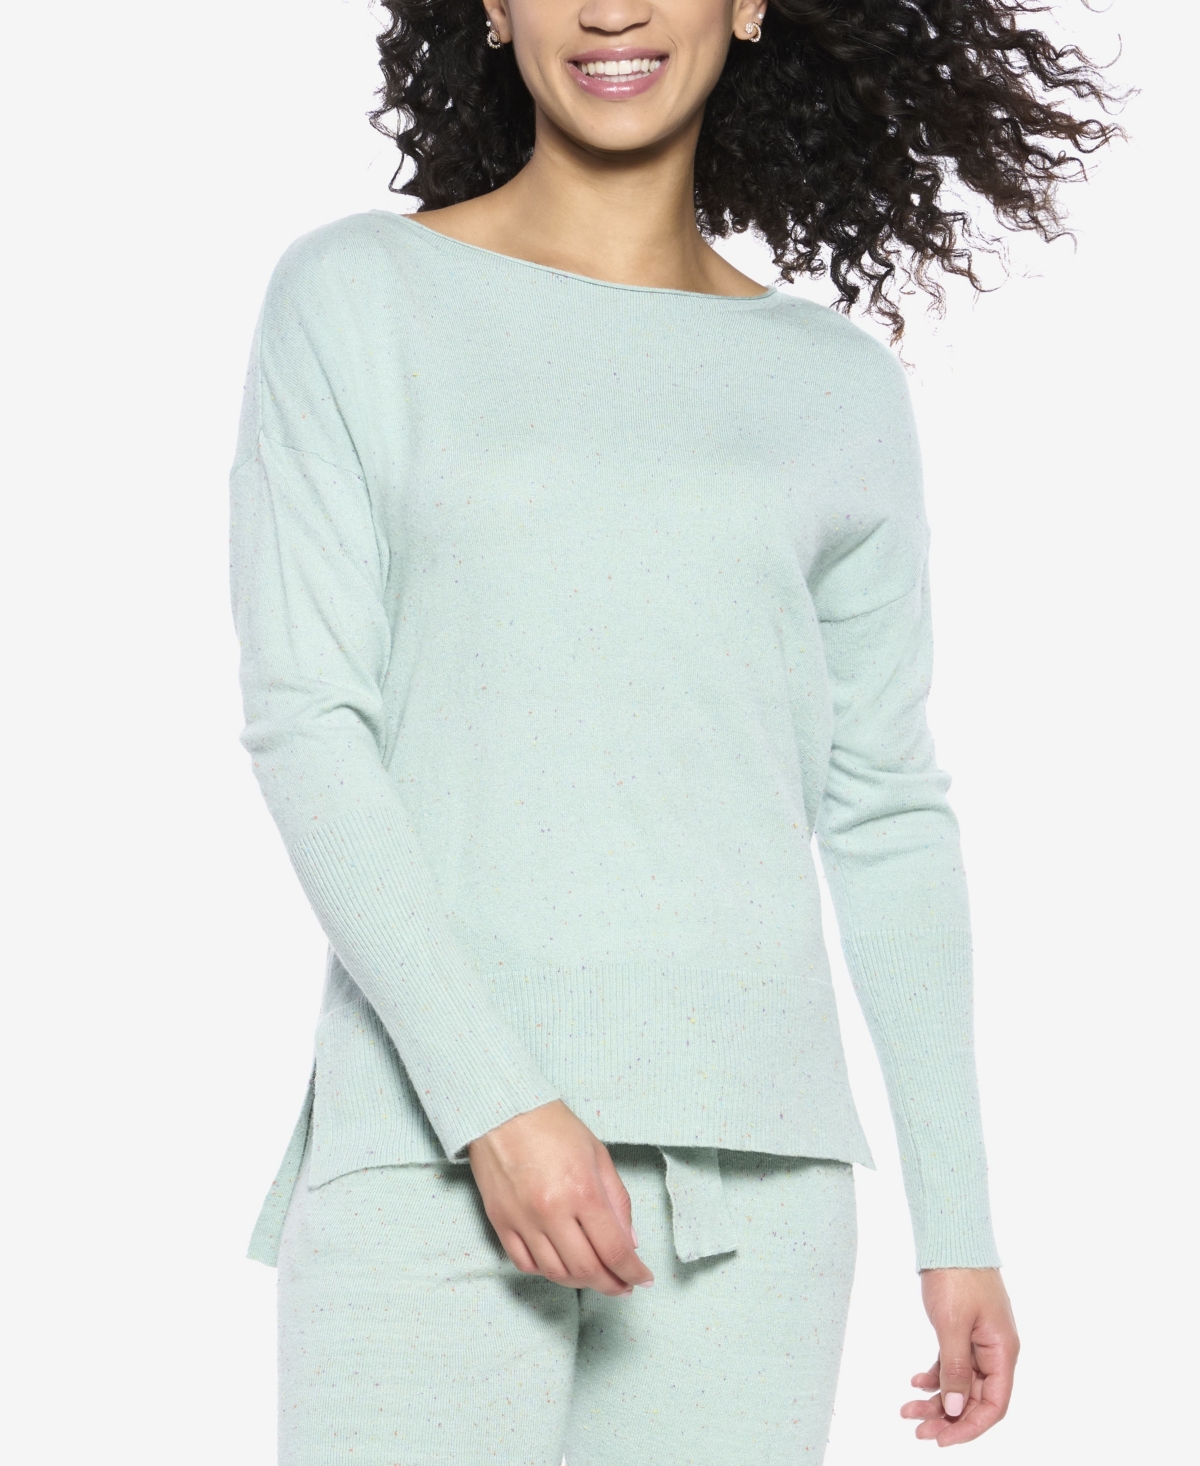 Voyage Textured Sweater Knit Lounge Top - Driftwood